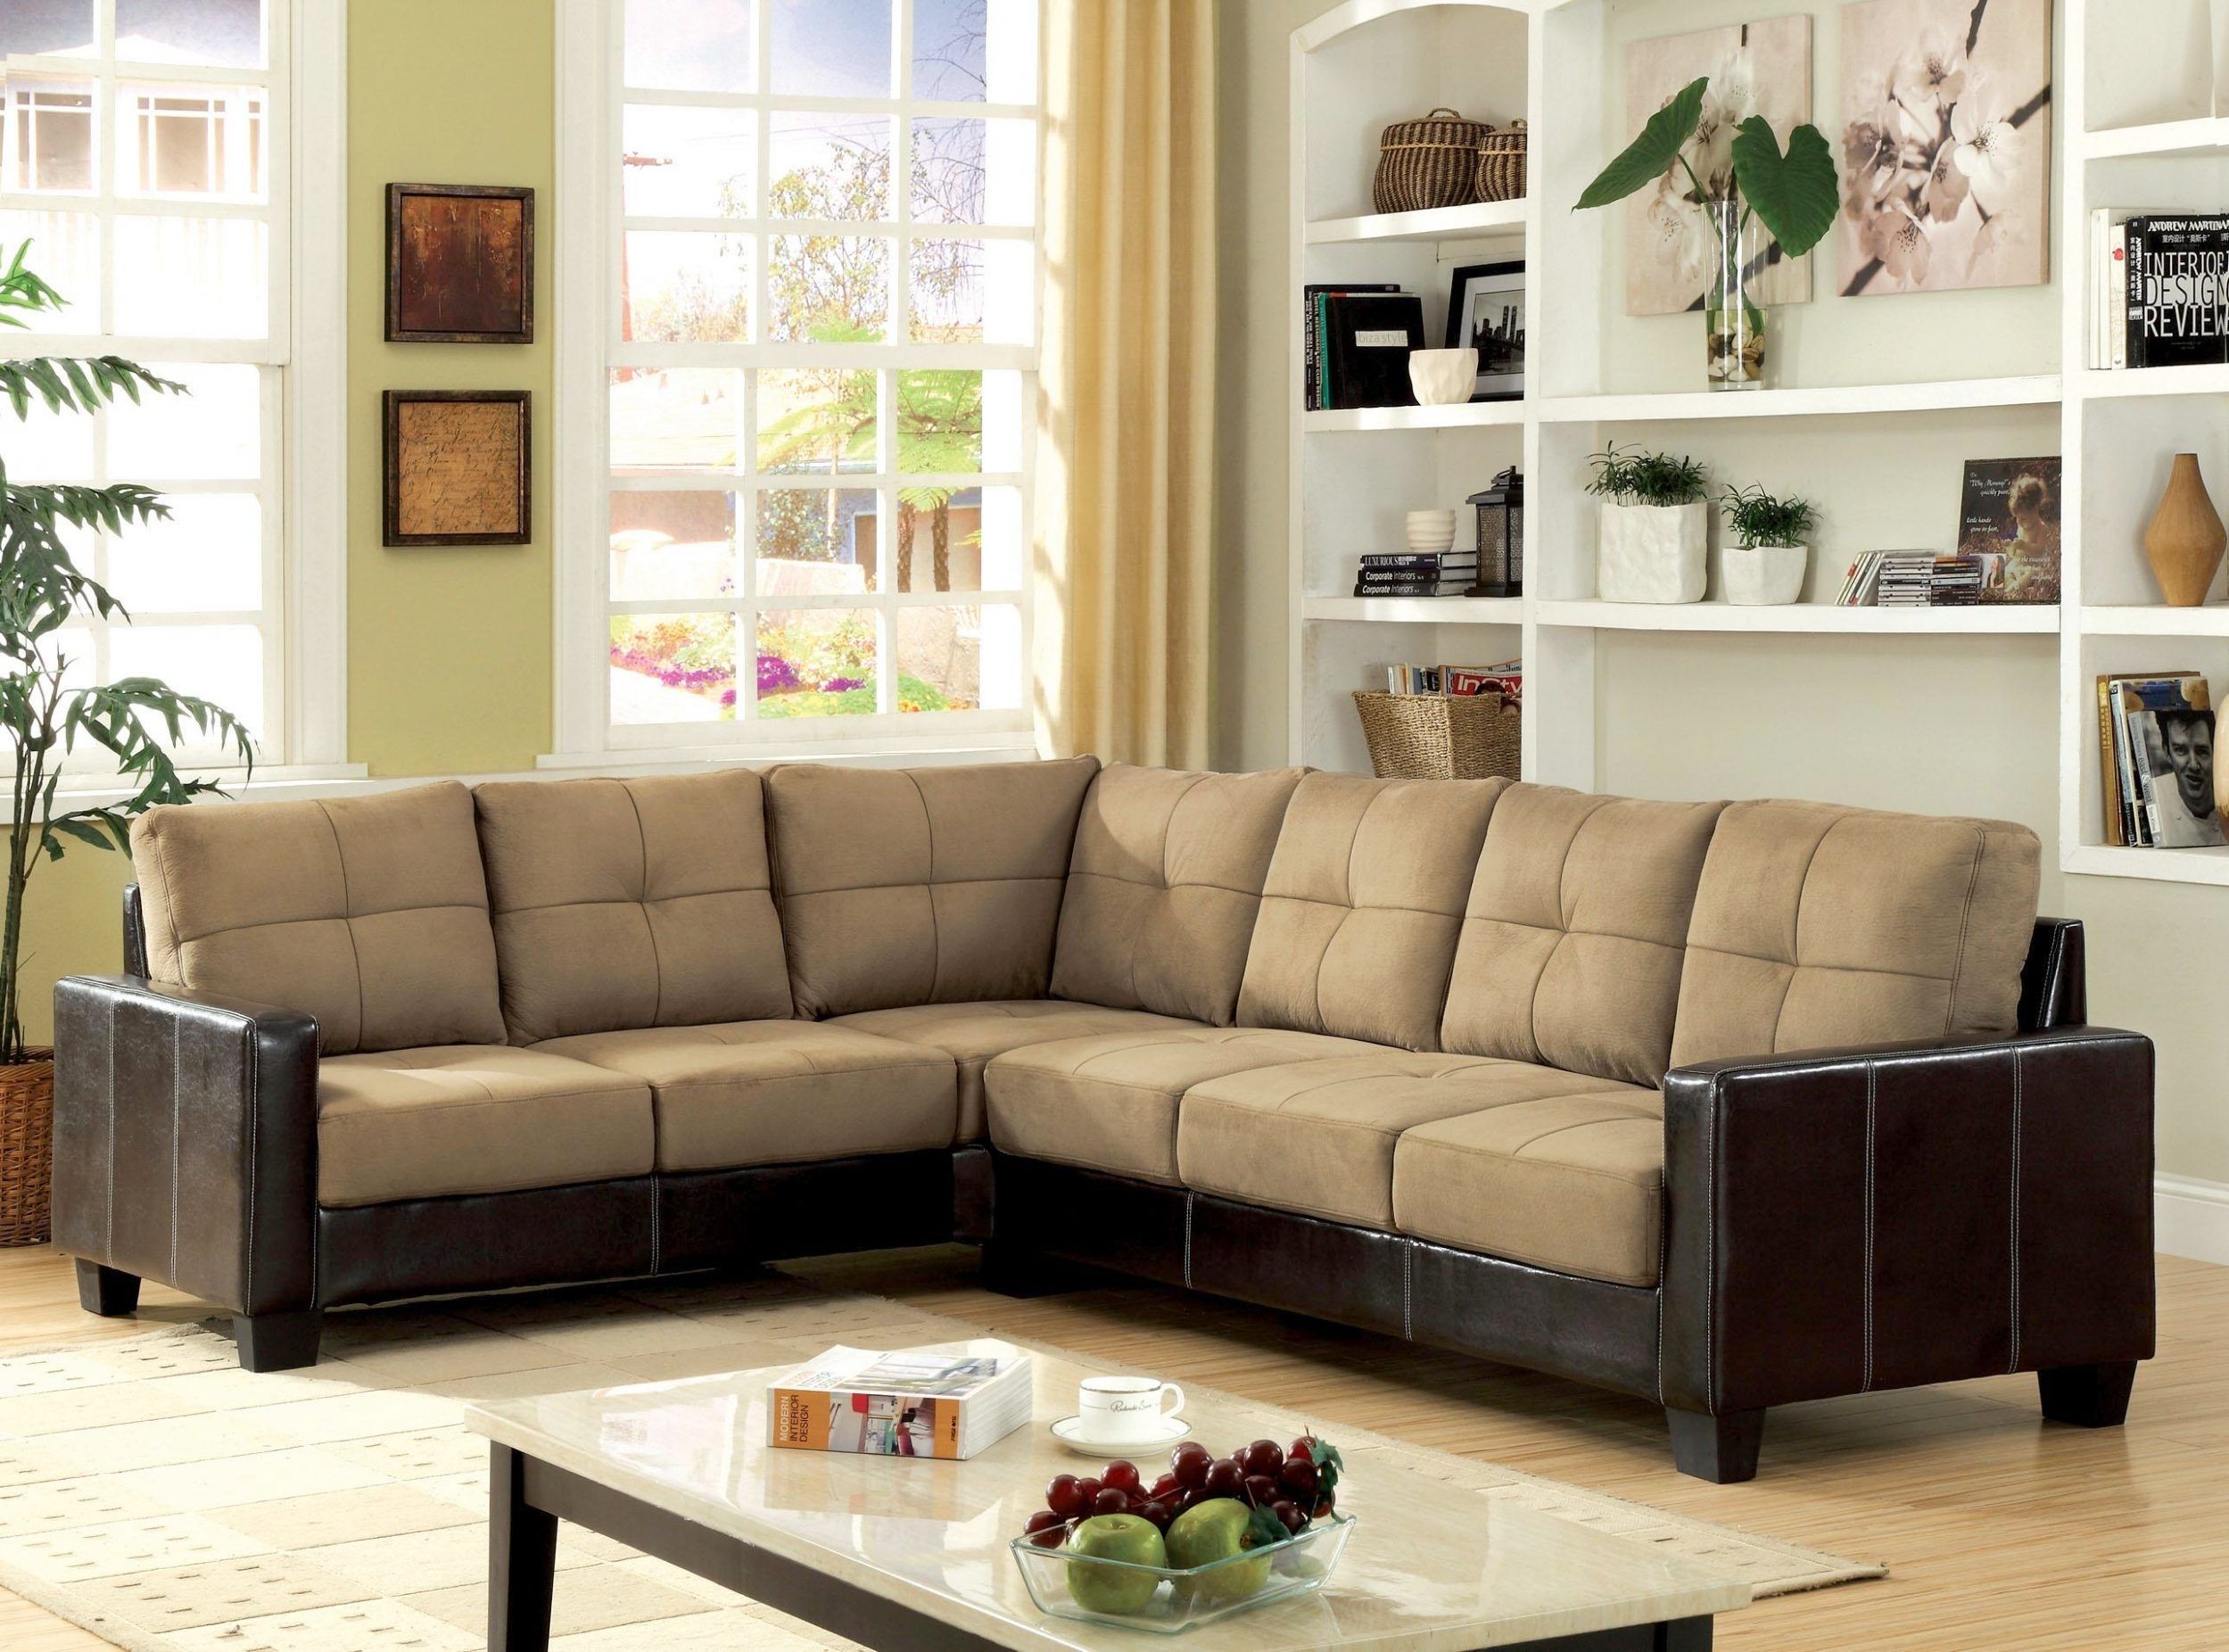 Inspiring Sectional Sofas Amazon 47 For Semi Circular Sectional Sofa For Sectional Sofas At Amazon (View 7 of 10)